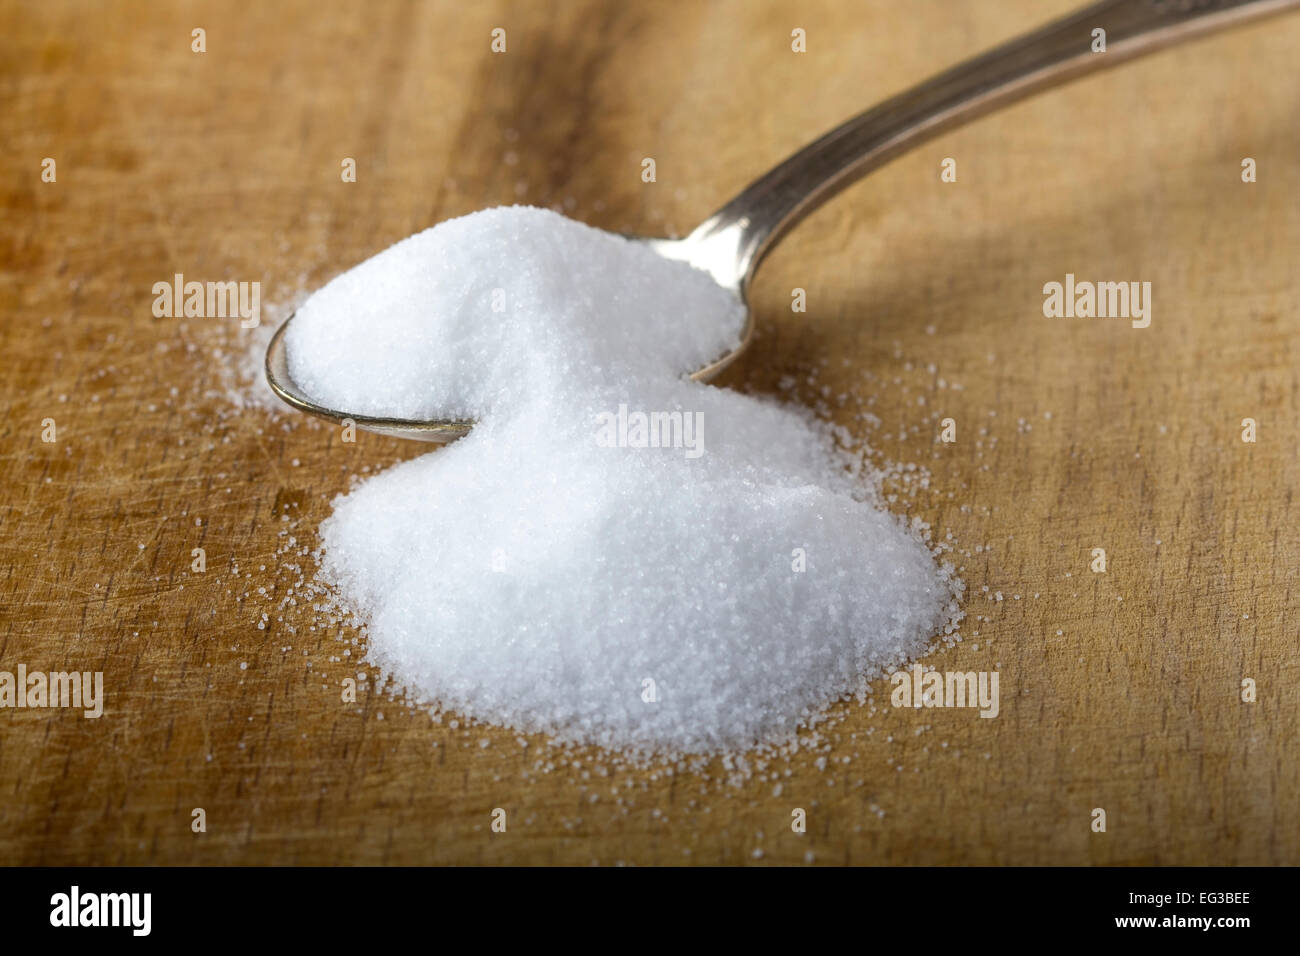 Silver spoon of baking soda over wood background Stock Photo